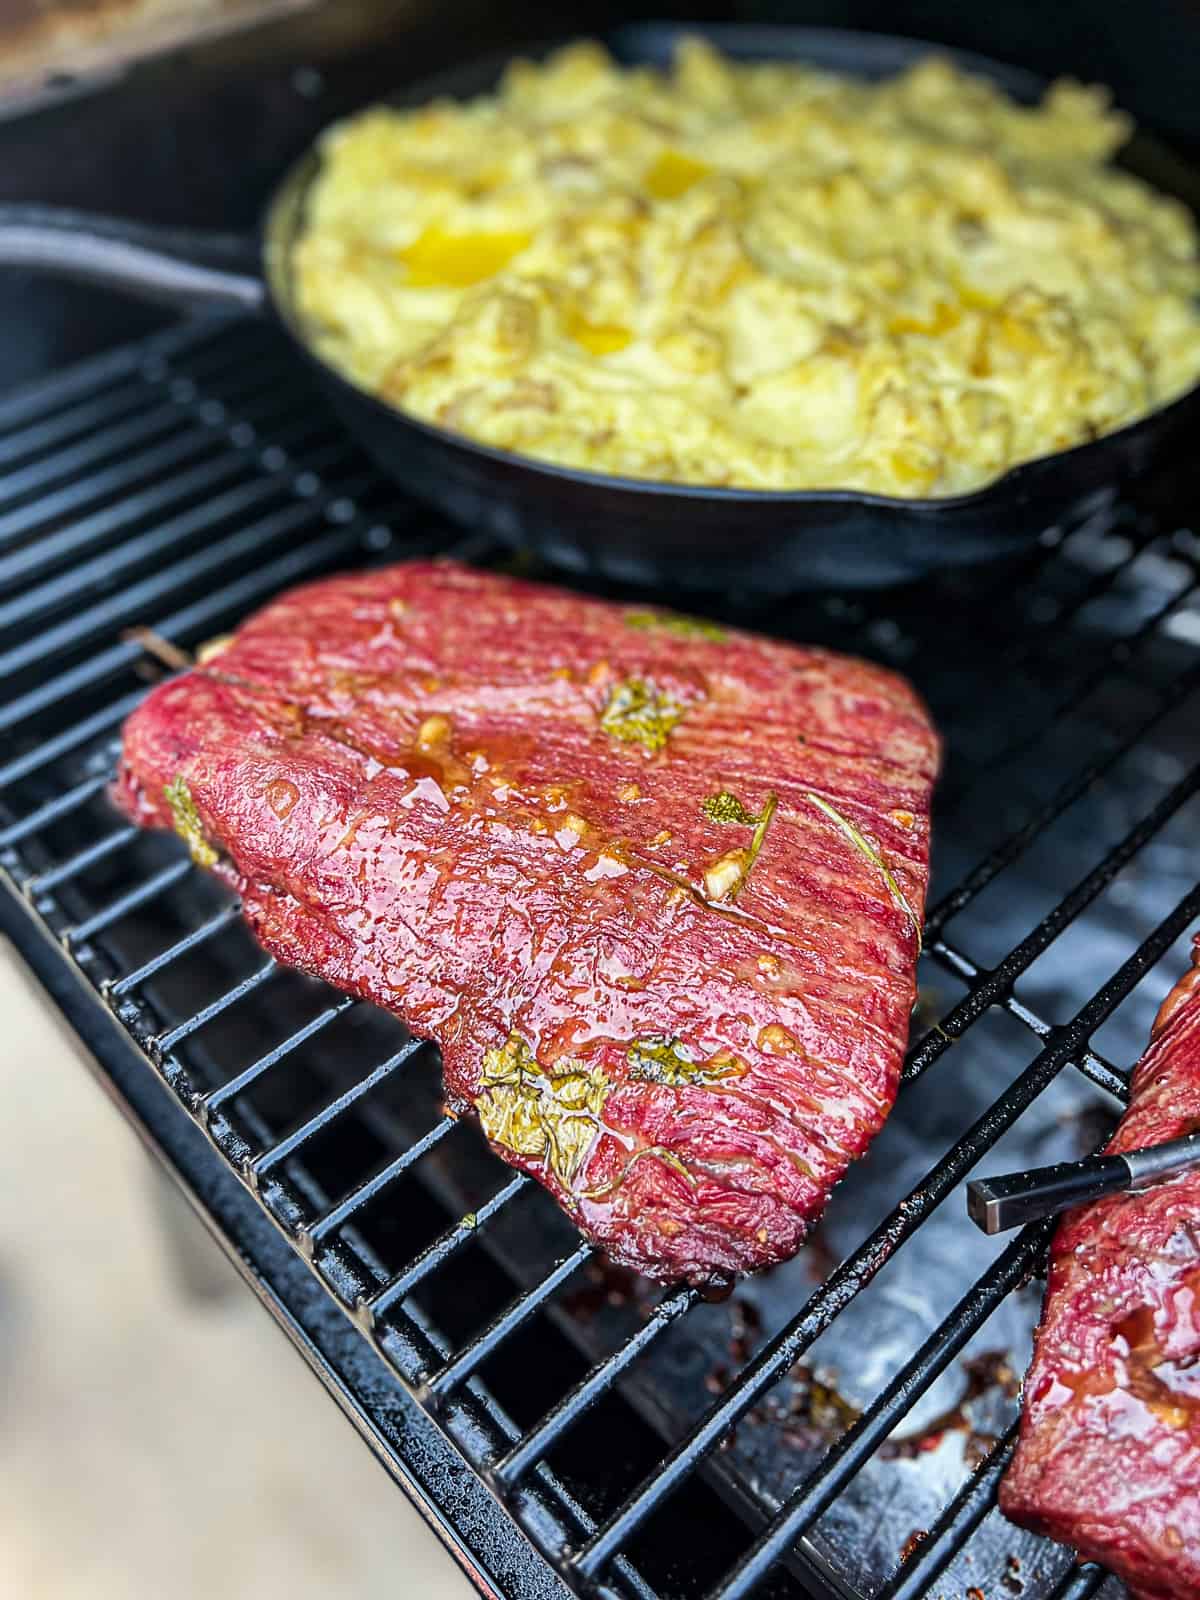 Traeger Smoking Flank Steak on the pellet grill with mashed potatoes